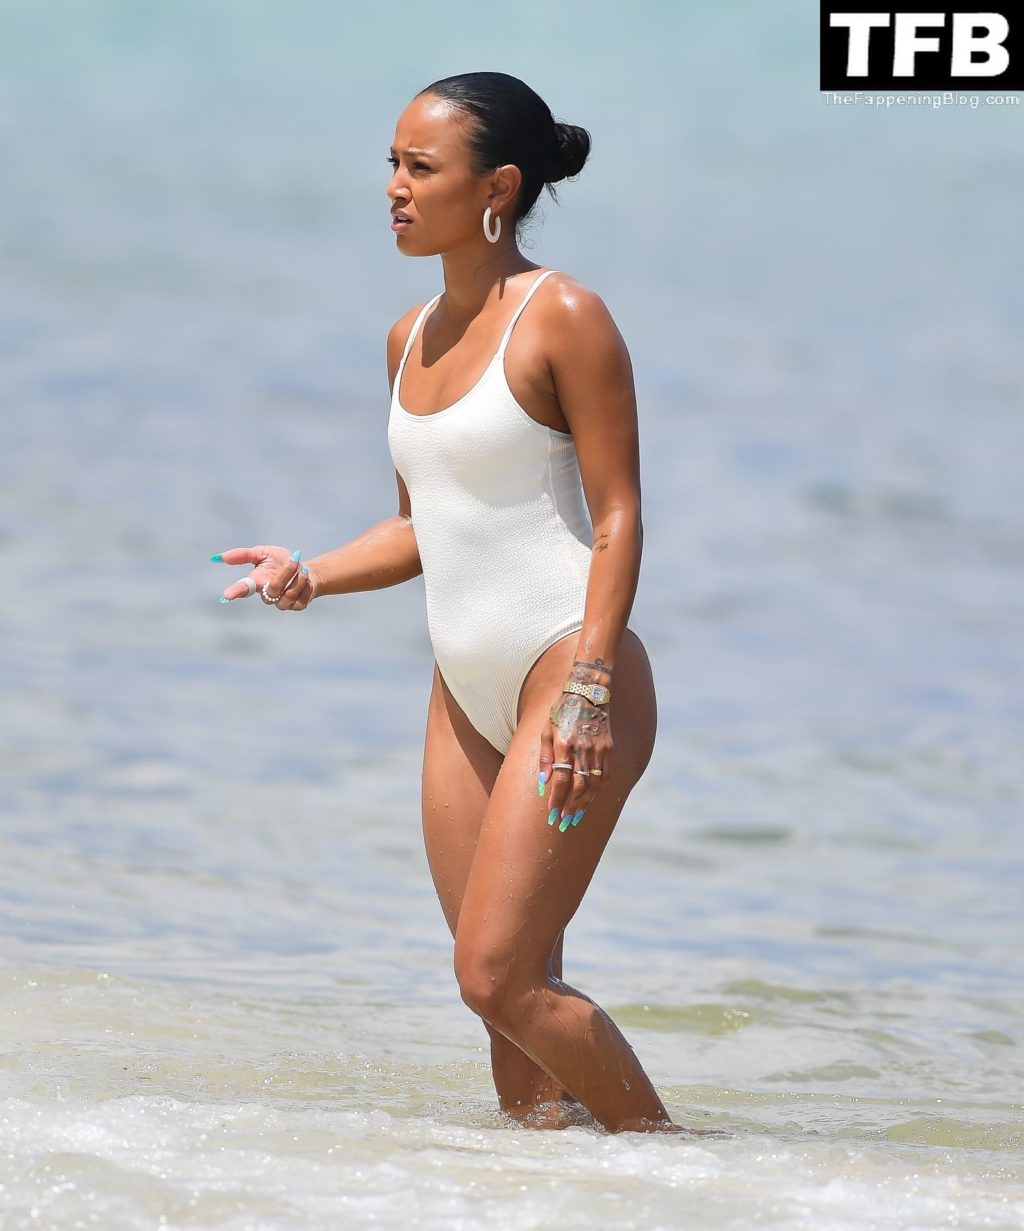 Karrueche Tran Sexy The Fappening Blog 21 1024x1231 - Karrueche Tran Looks Incredible in a White Swimsuit on the Beach in Miami (45 Photos)